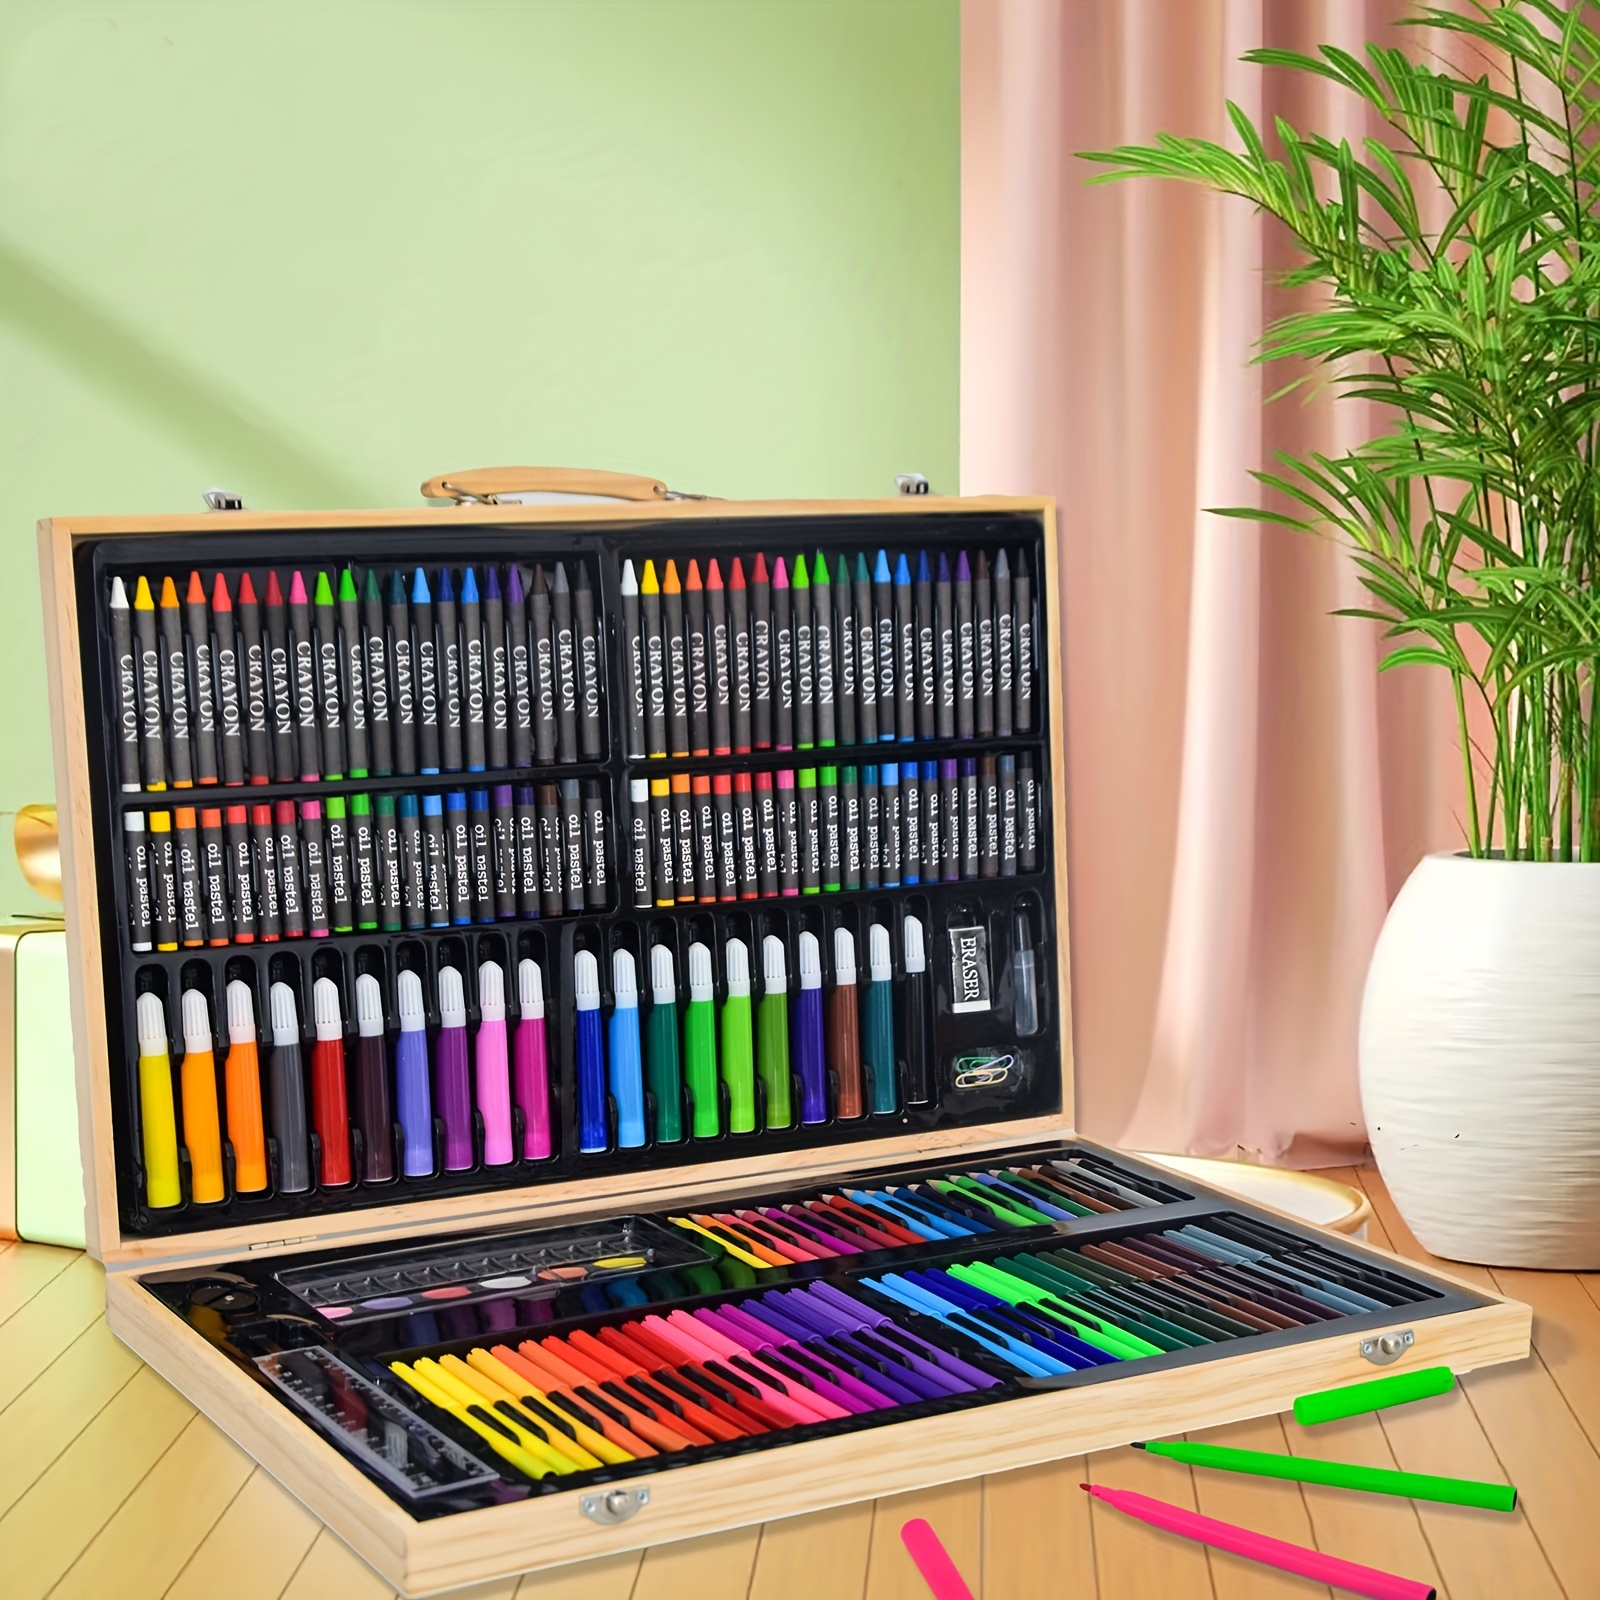 180pcs Painting Kits Oil Painting Sticks, Watercolor Pens, Crayons, Colored  Pencils, Paperclips, Palette, Pencil Sharpener, Glue, Eraser, Portable Art  Supplies For Kids, Teens And Adults, Don't Miss These Great Deals